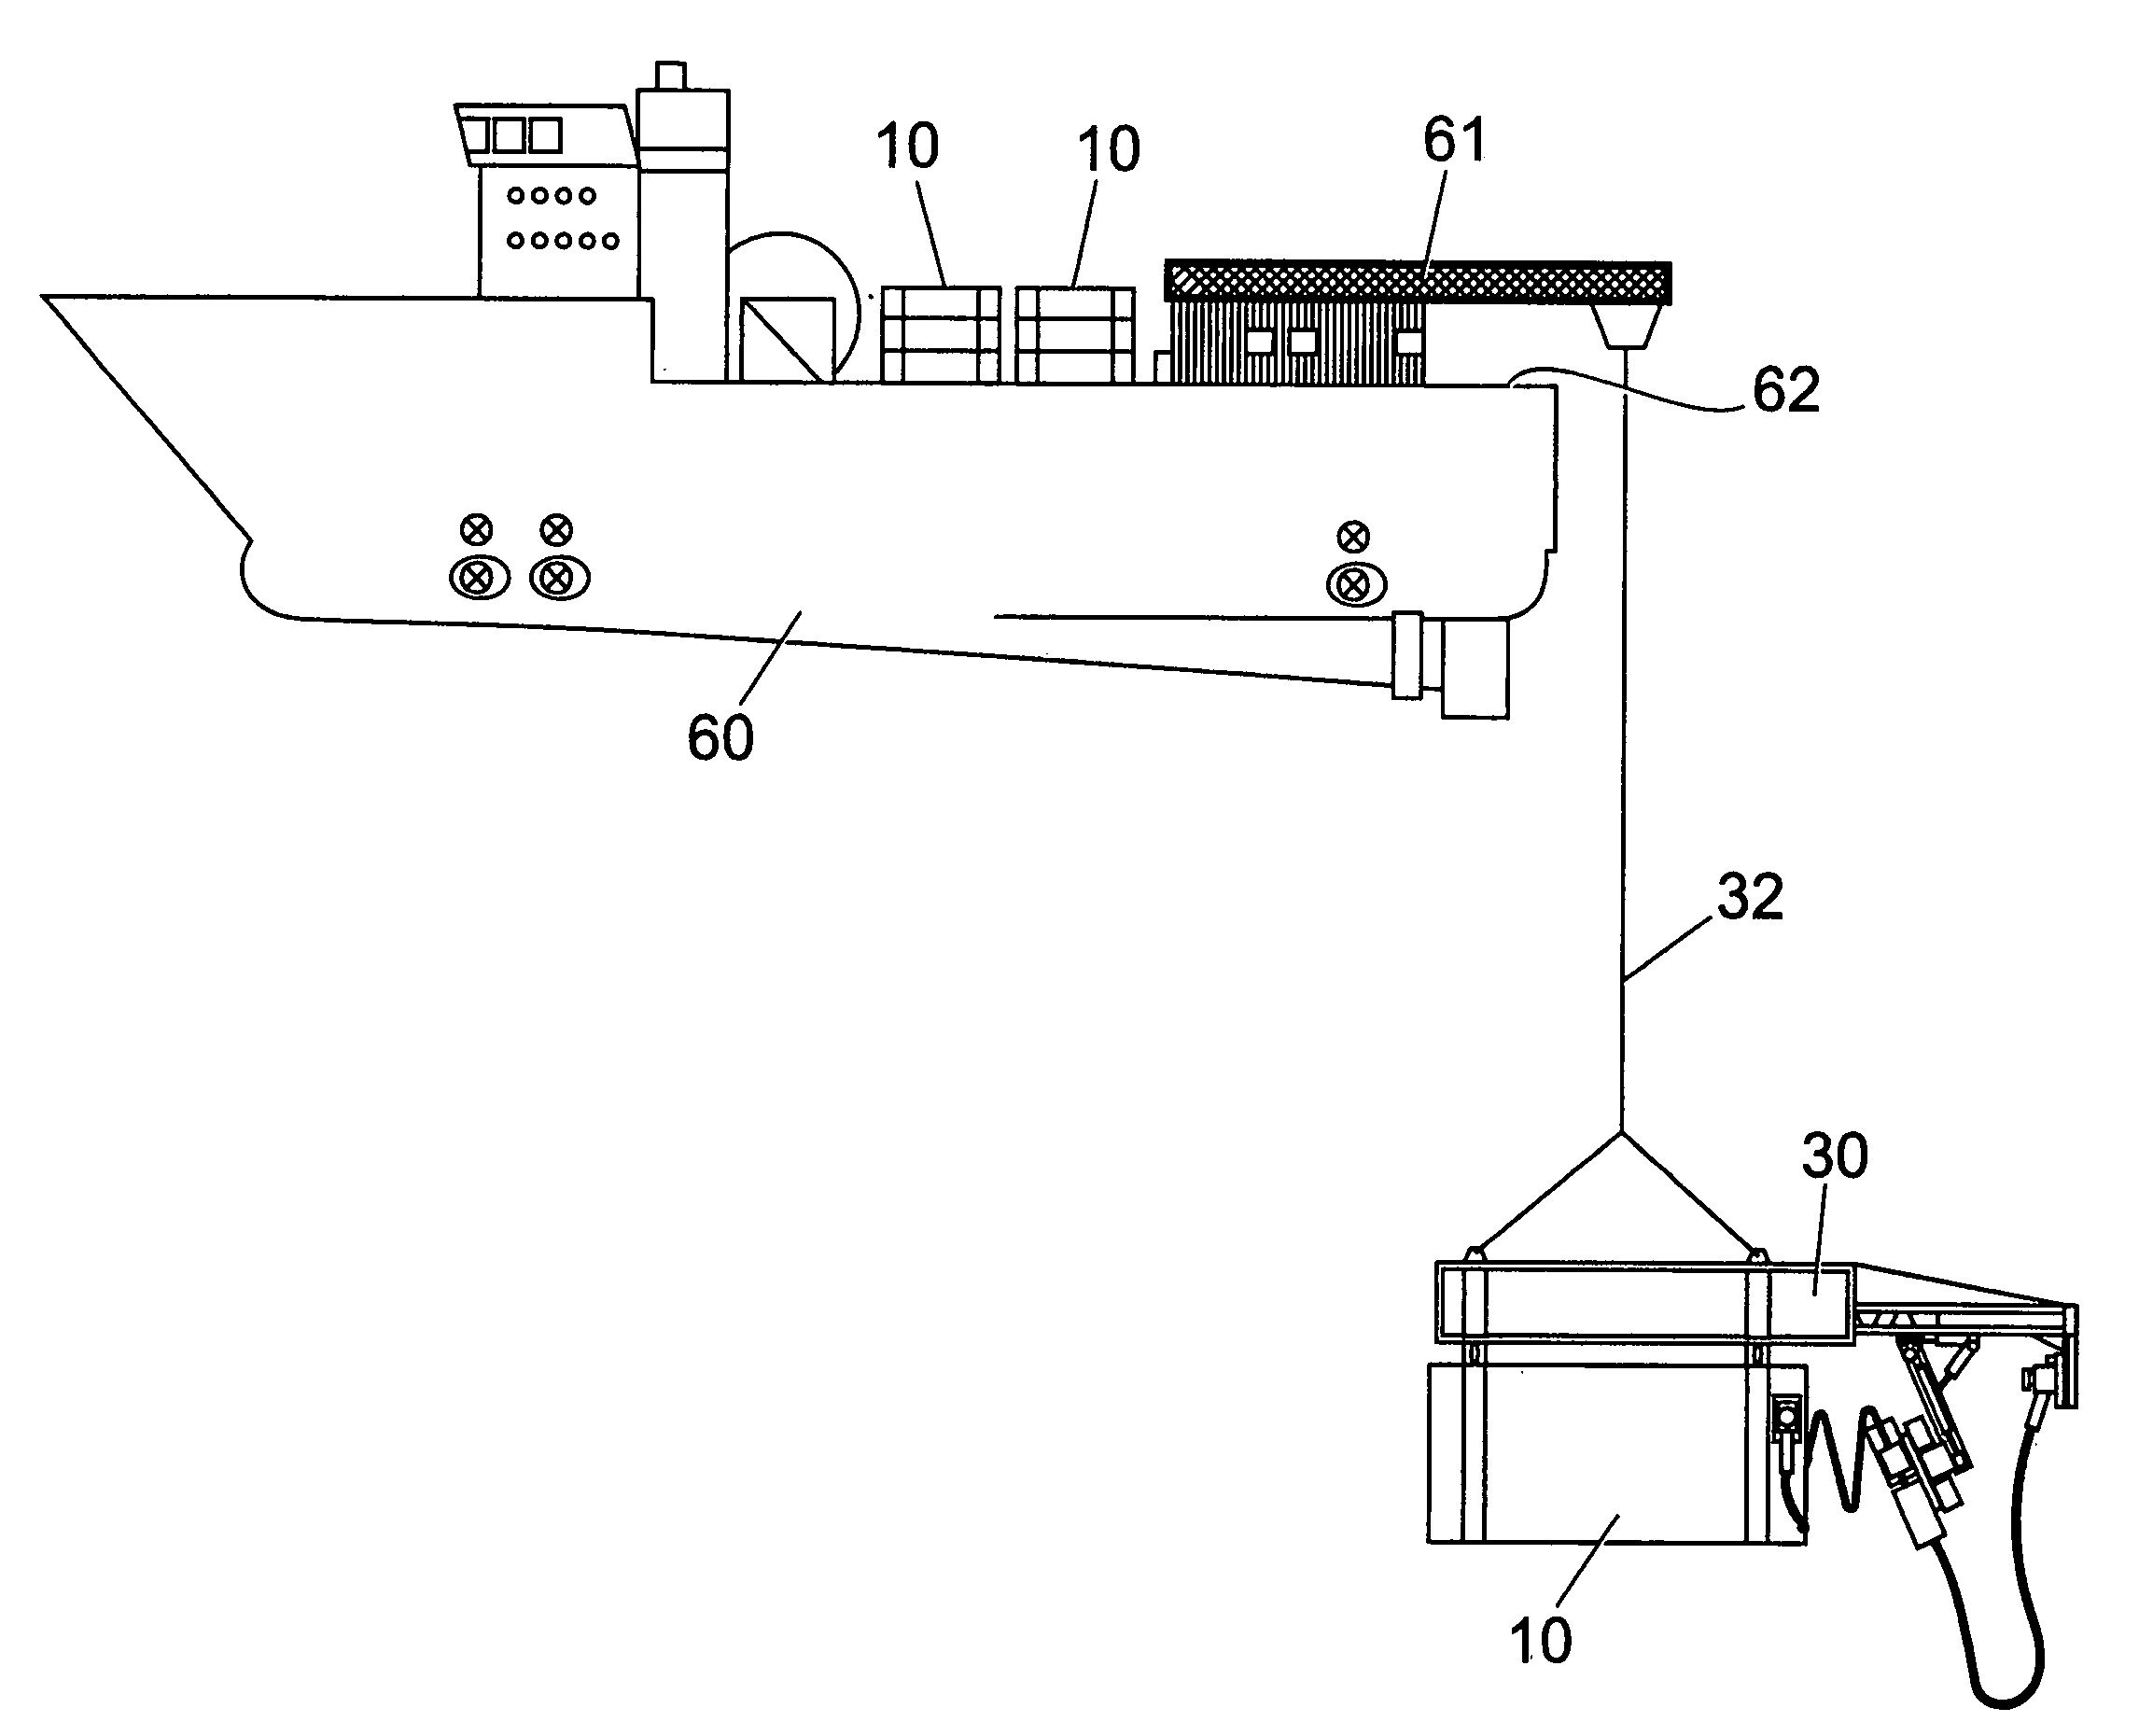 Method and apparatus for deploying a tubular